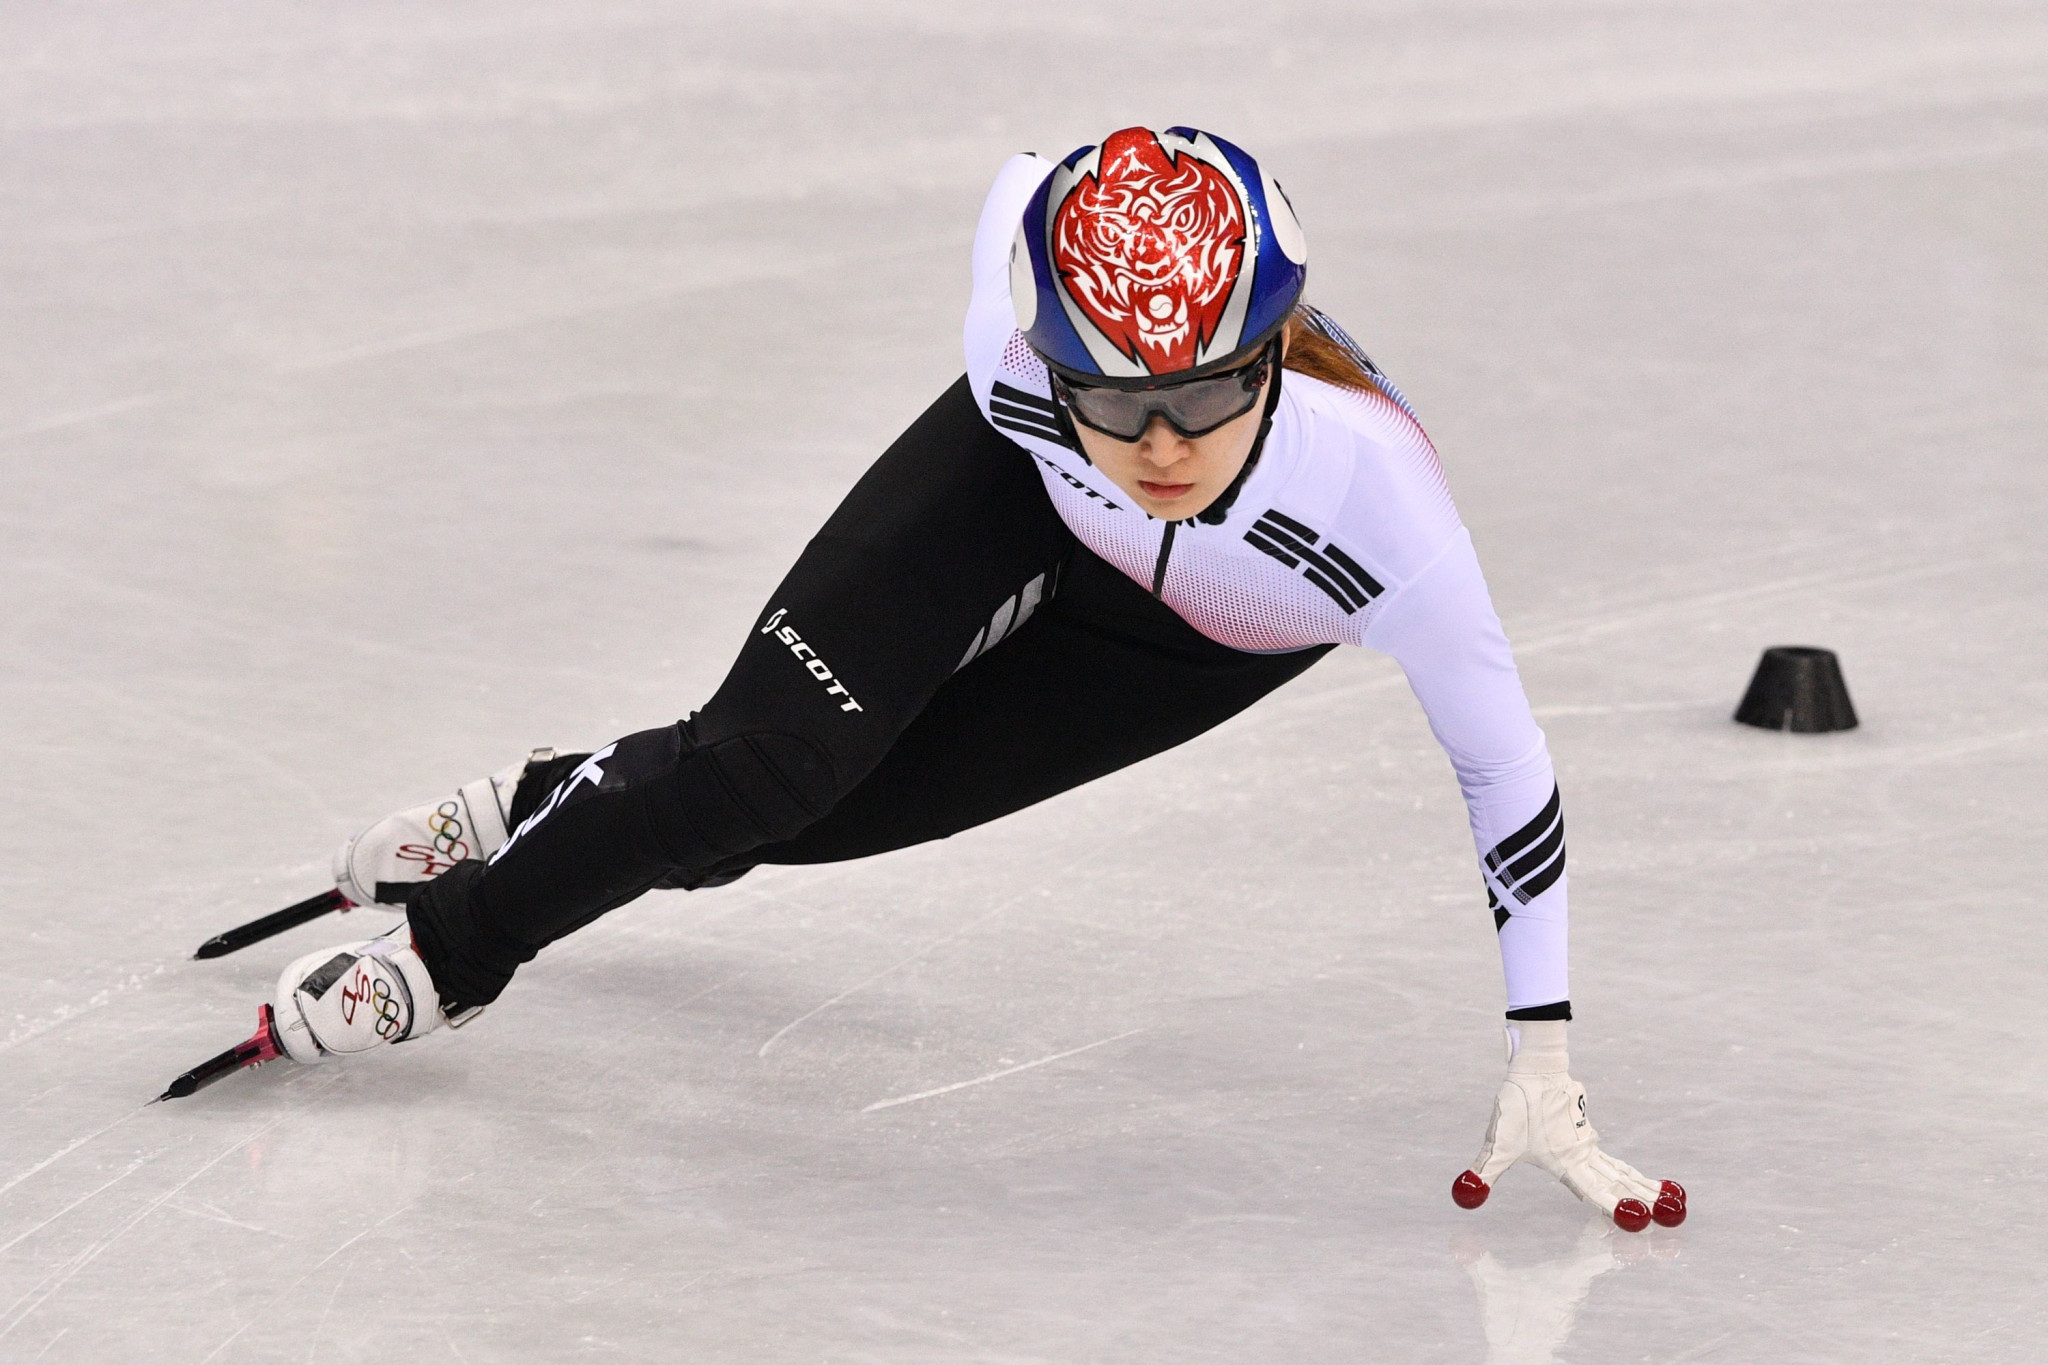 South Korea's Choi claims double gold at World Short Track Speed Skating Championships 